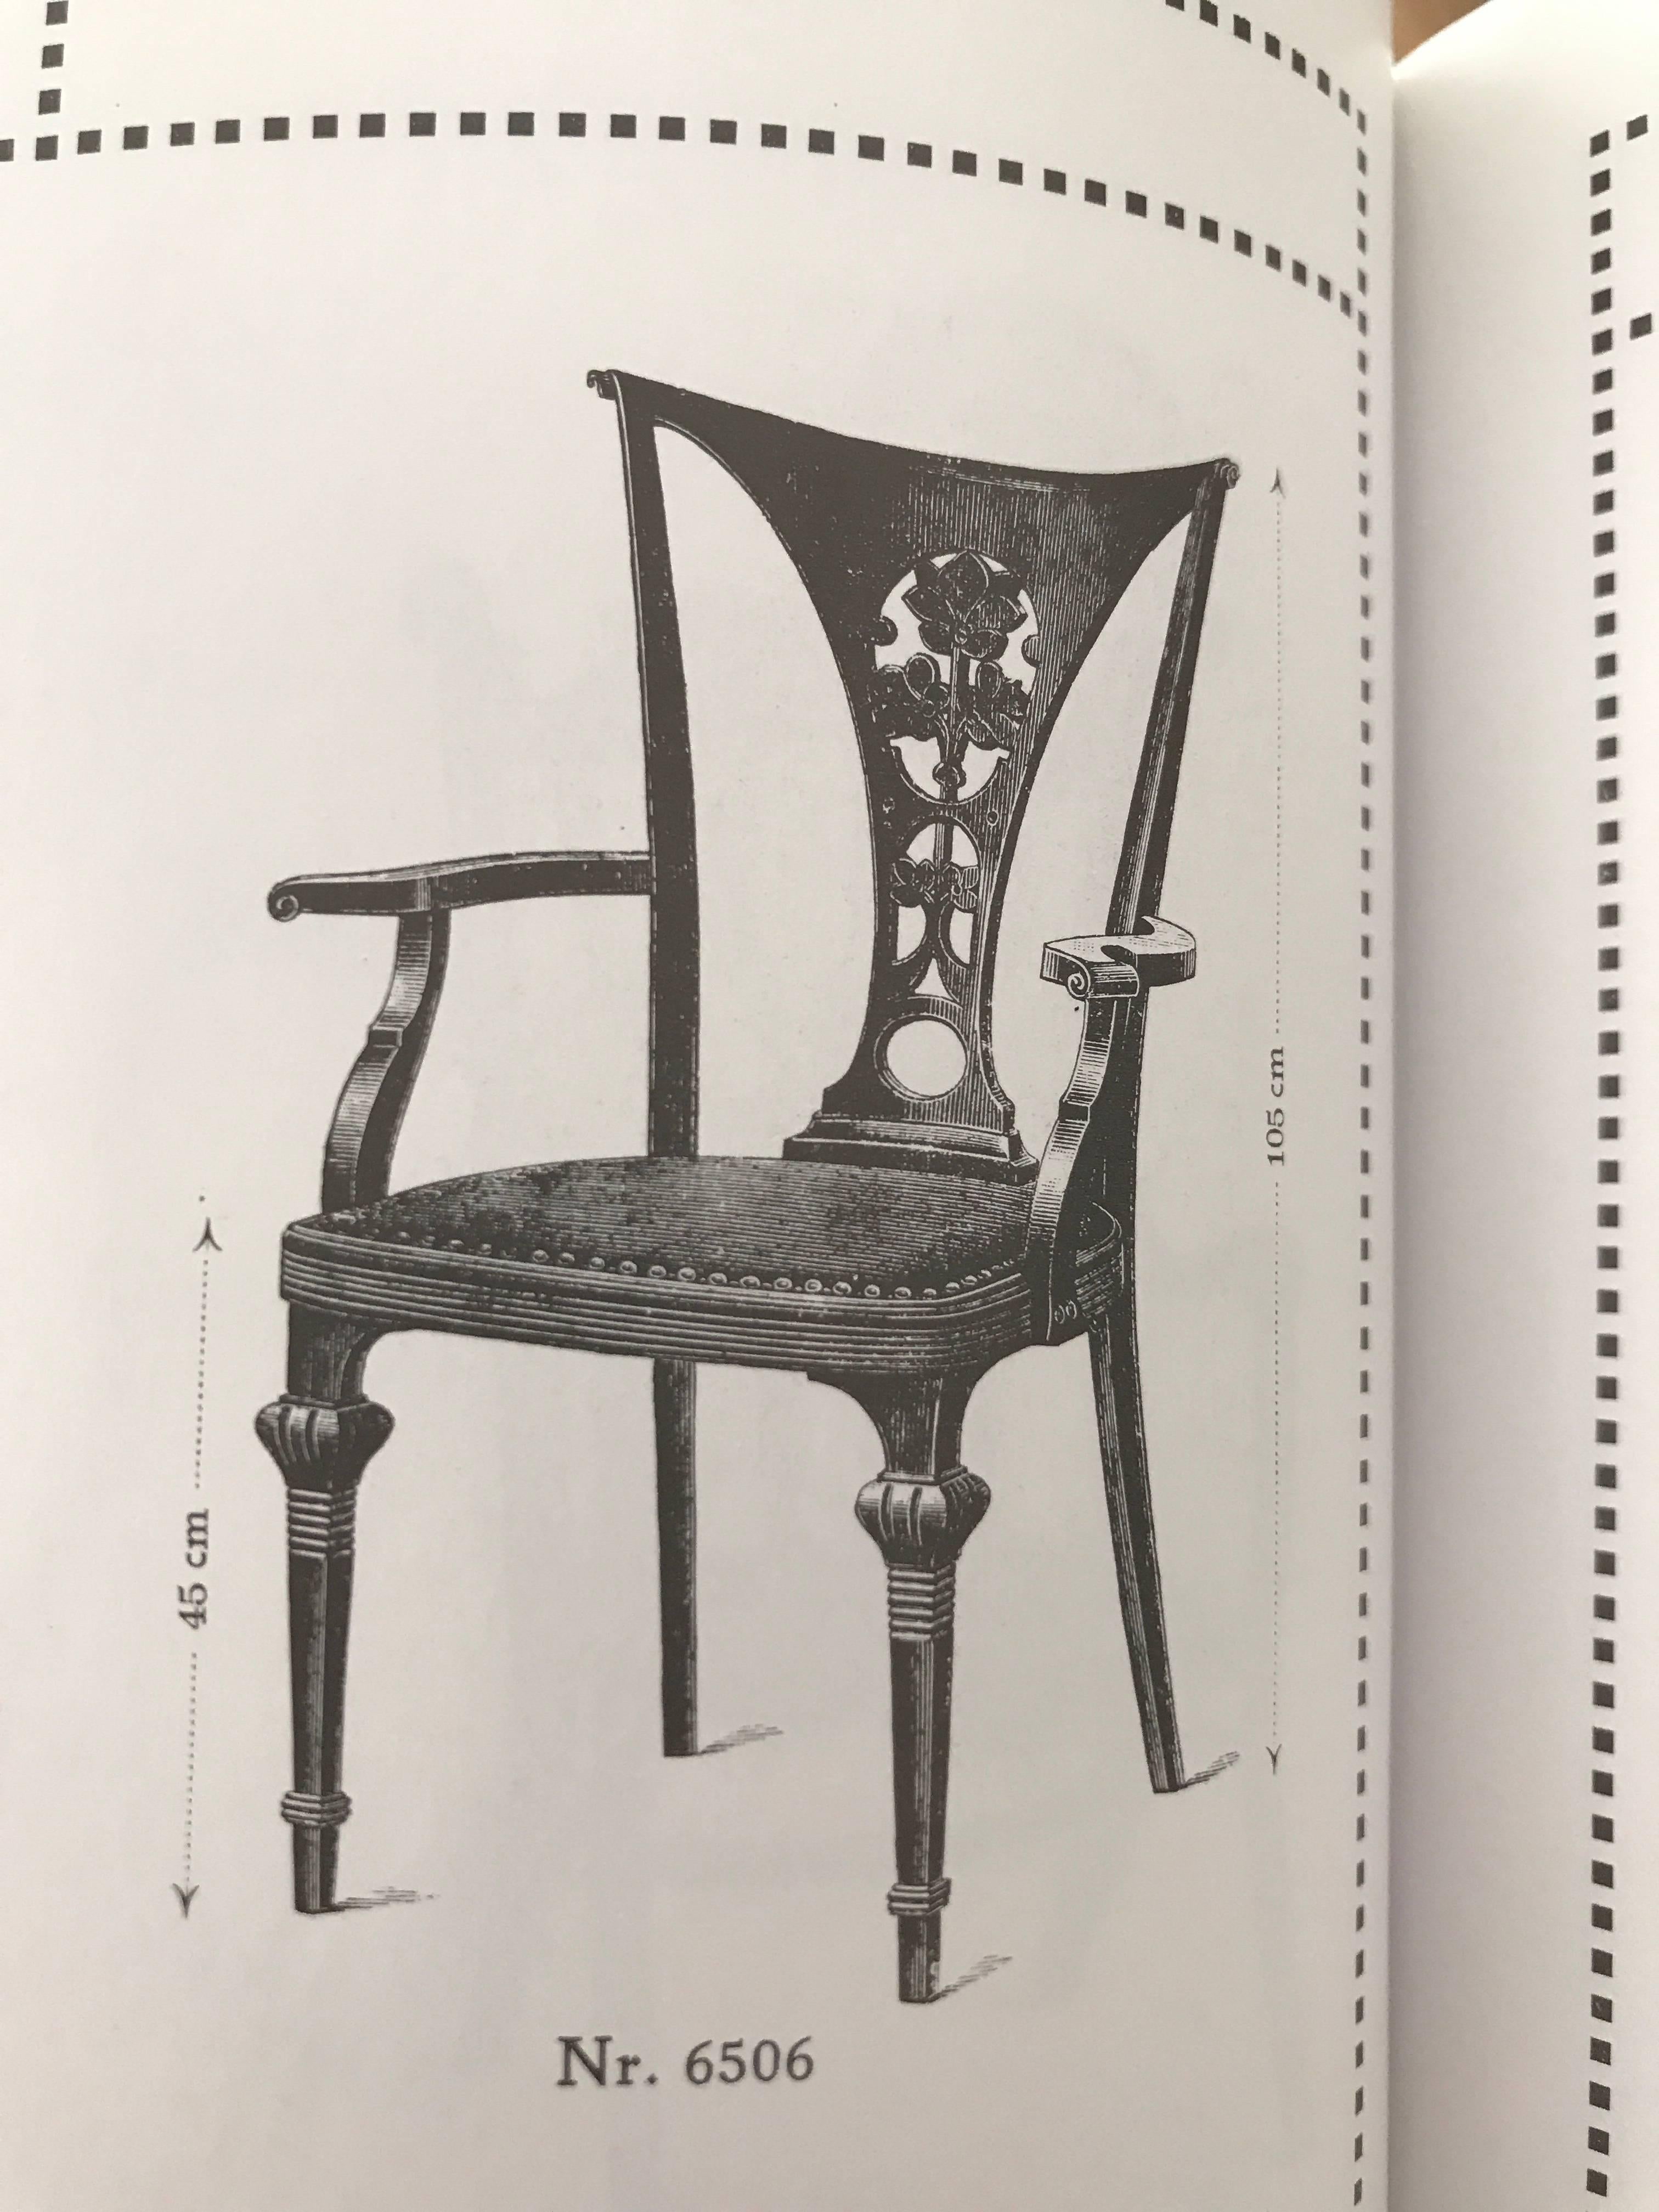 Two very rare Thonet armchairs with original upholstering
stamped Thonet
published in the Thonet catalogue 1911-1915 as nr 6506
These armchairs are not typical bentwood Thonet chairs and are often not recognized as Thonet chairs and that’s why